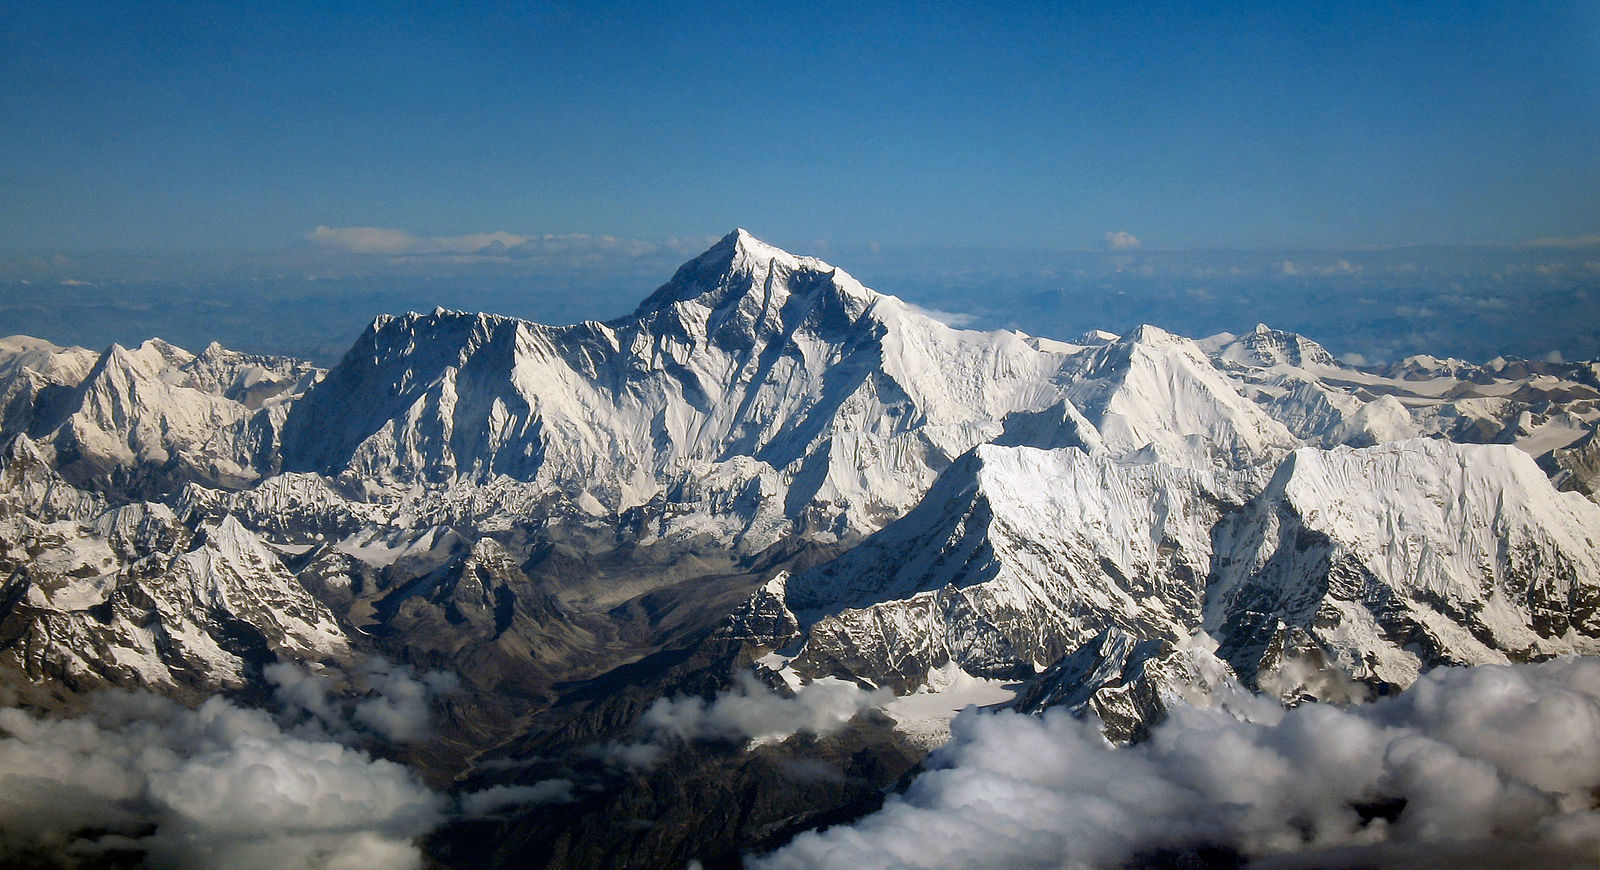 A photograph of Mount Everest; the mountain is covered in snow and imposing.